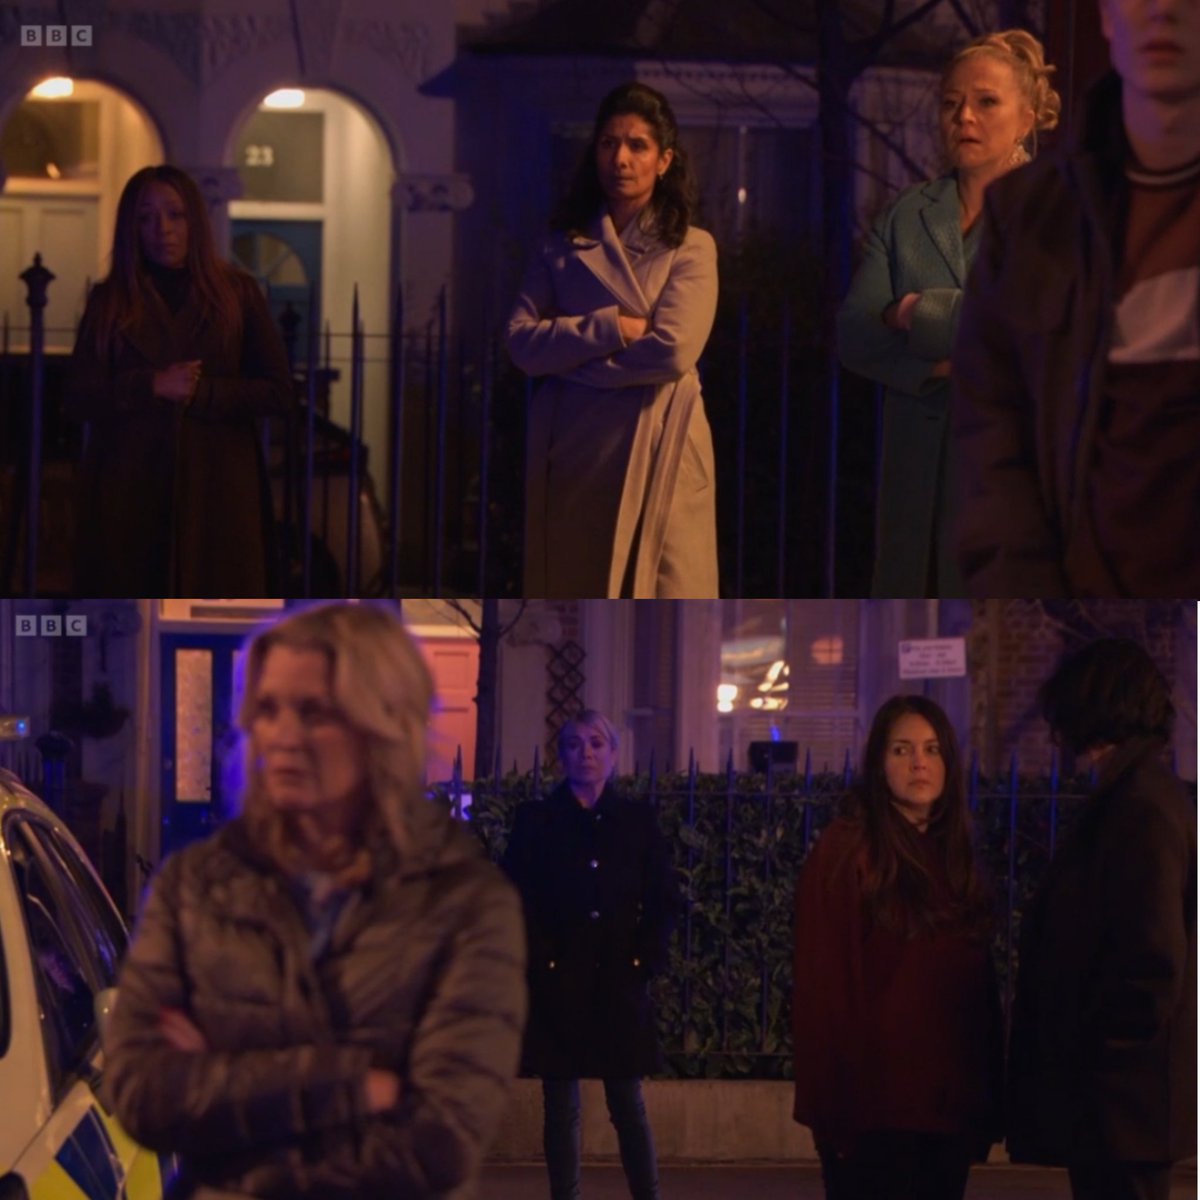 When Eastenders gets it right, it gets it SO right. The Six storyline just gets better with time and tonight's episode was PHENOMENAL. Shout out to the six girlies who are all playing a blinder.